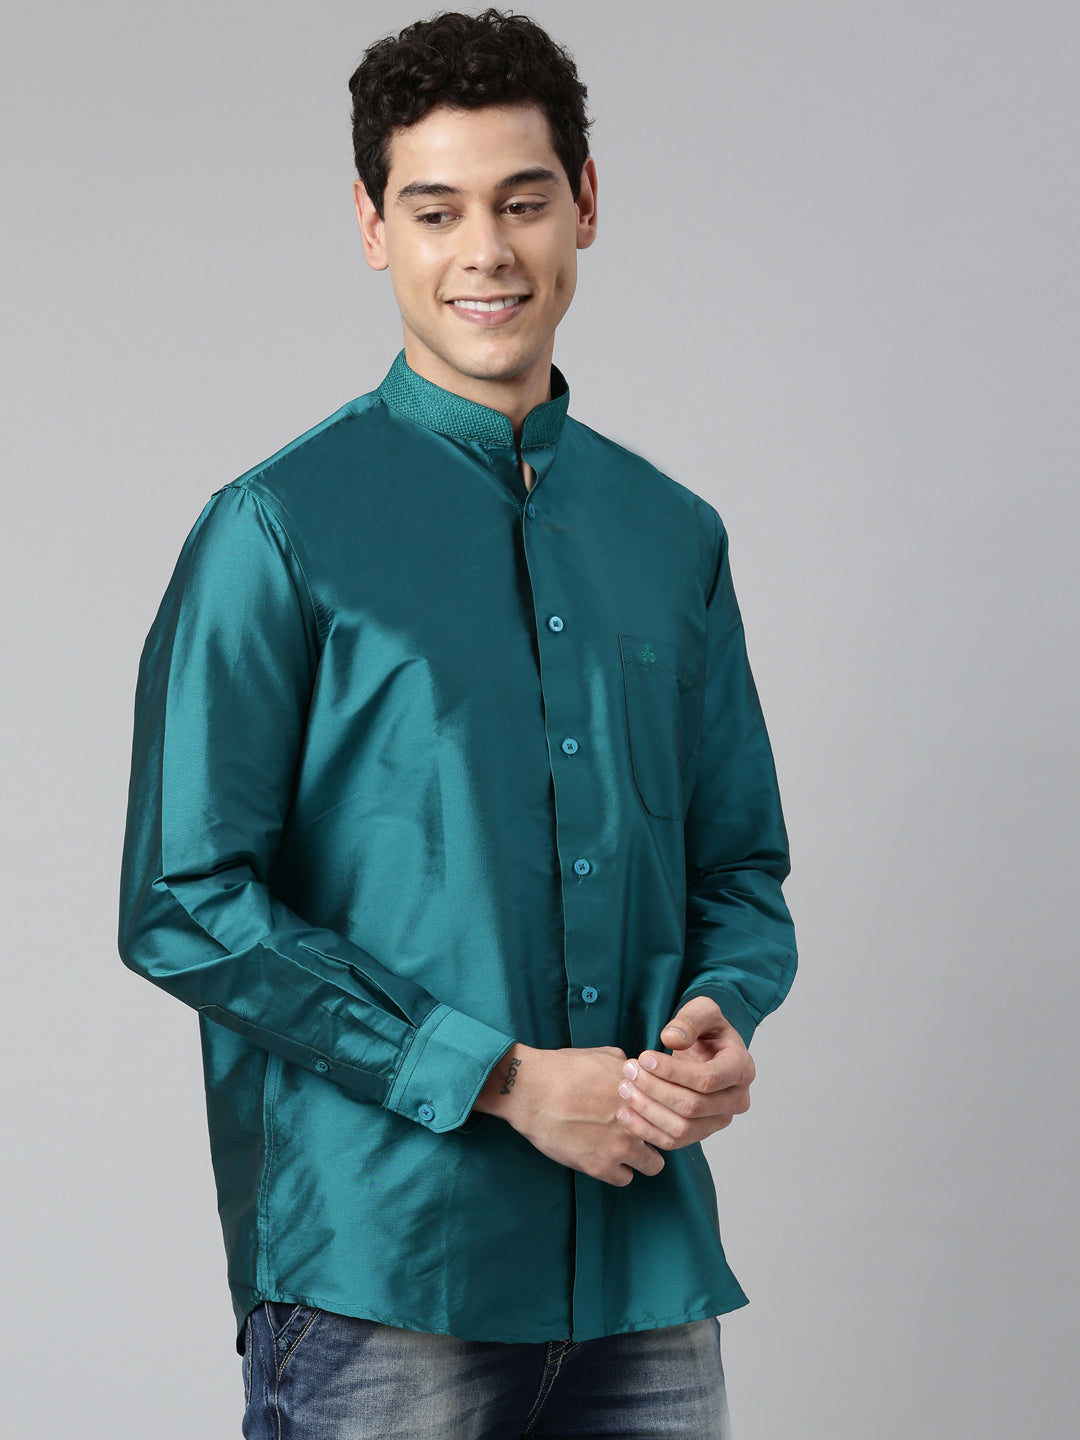 Sea Green Color Art Silk Slim Fit Solid Party Shirt